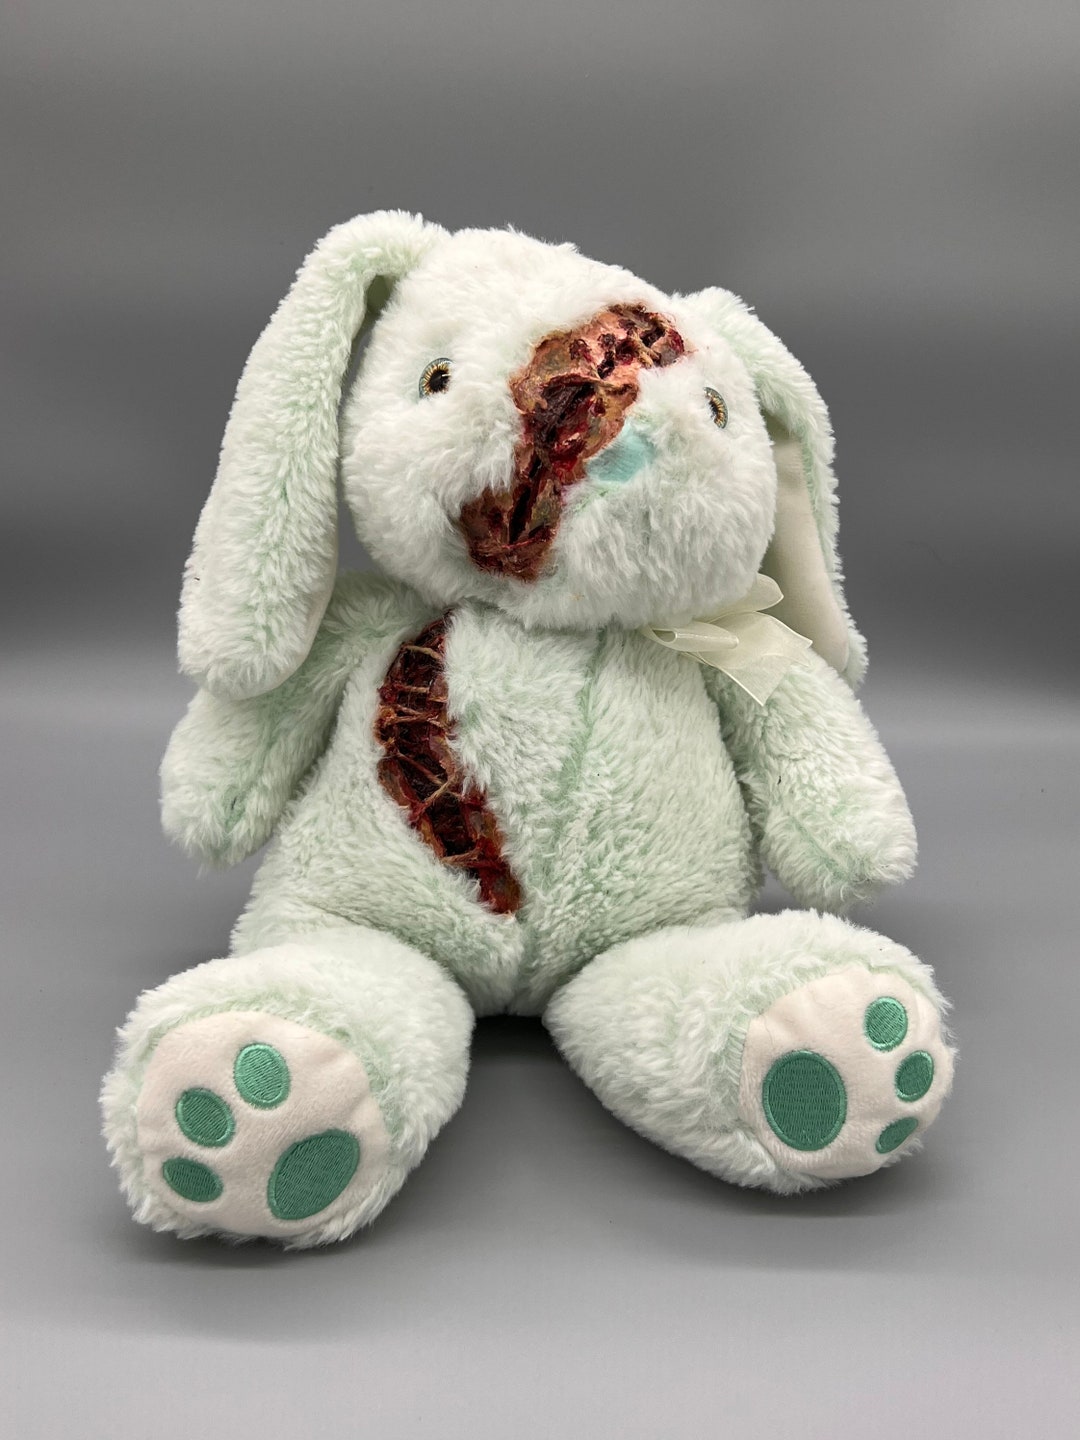 Stitched Bunny // Spooky Creepy Gore Horror Stuffed Animal // 